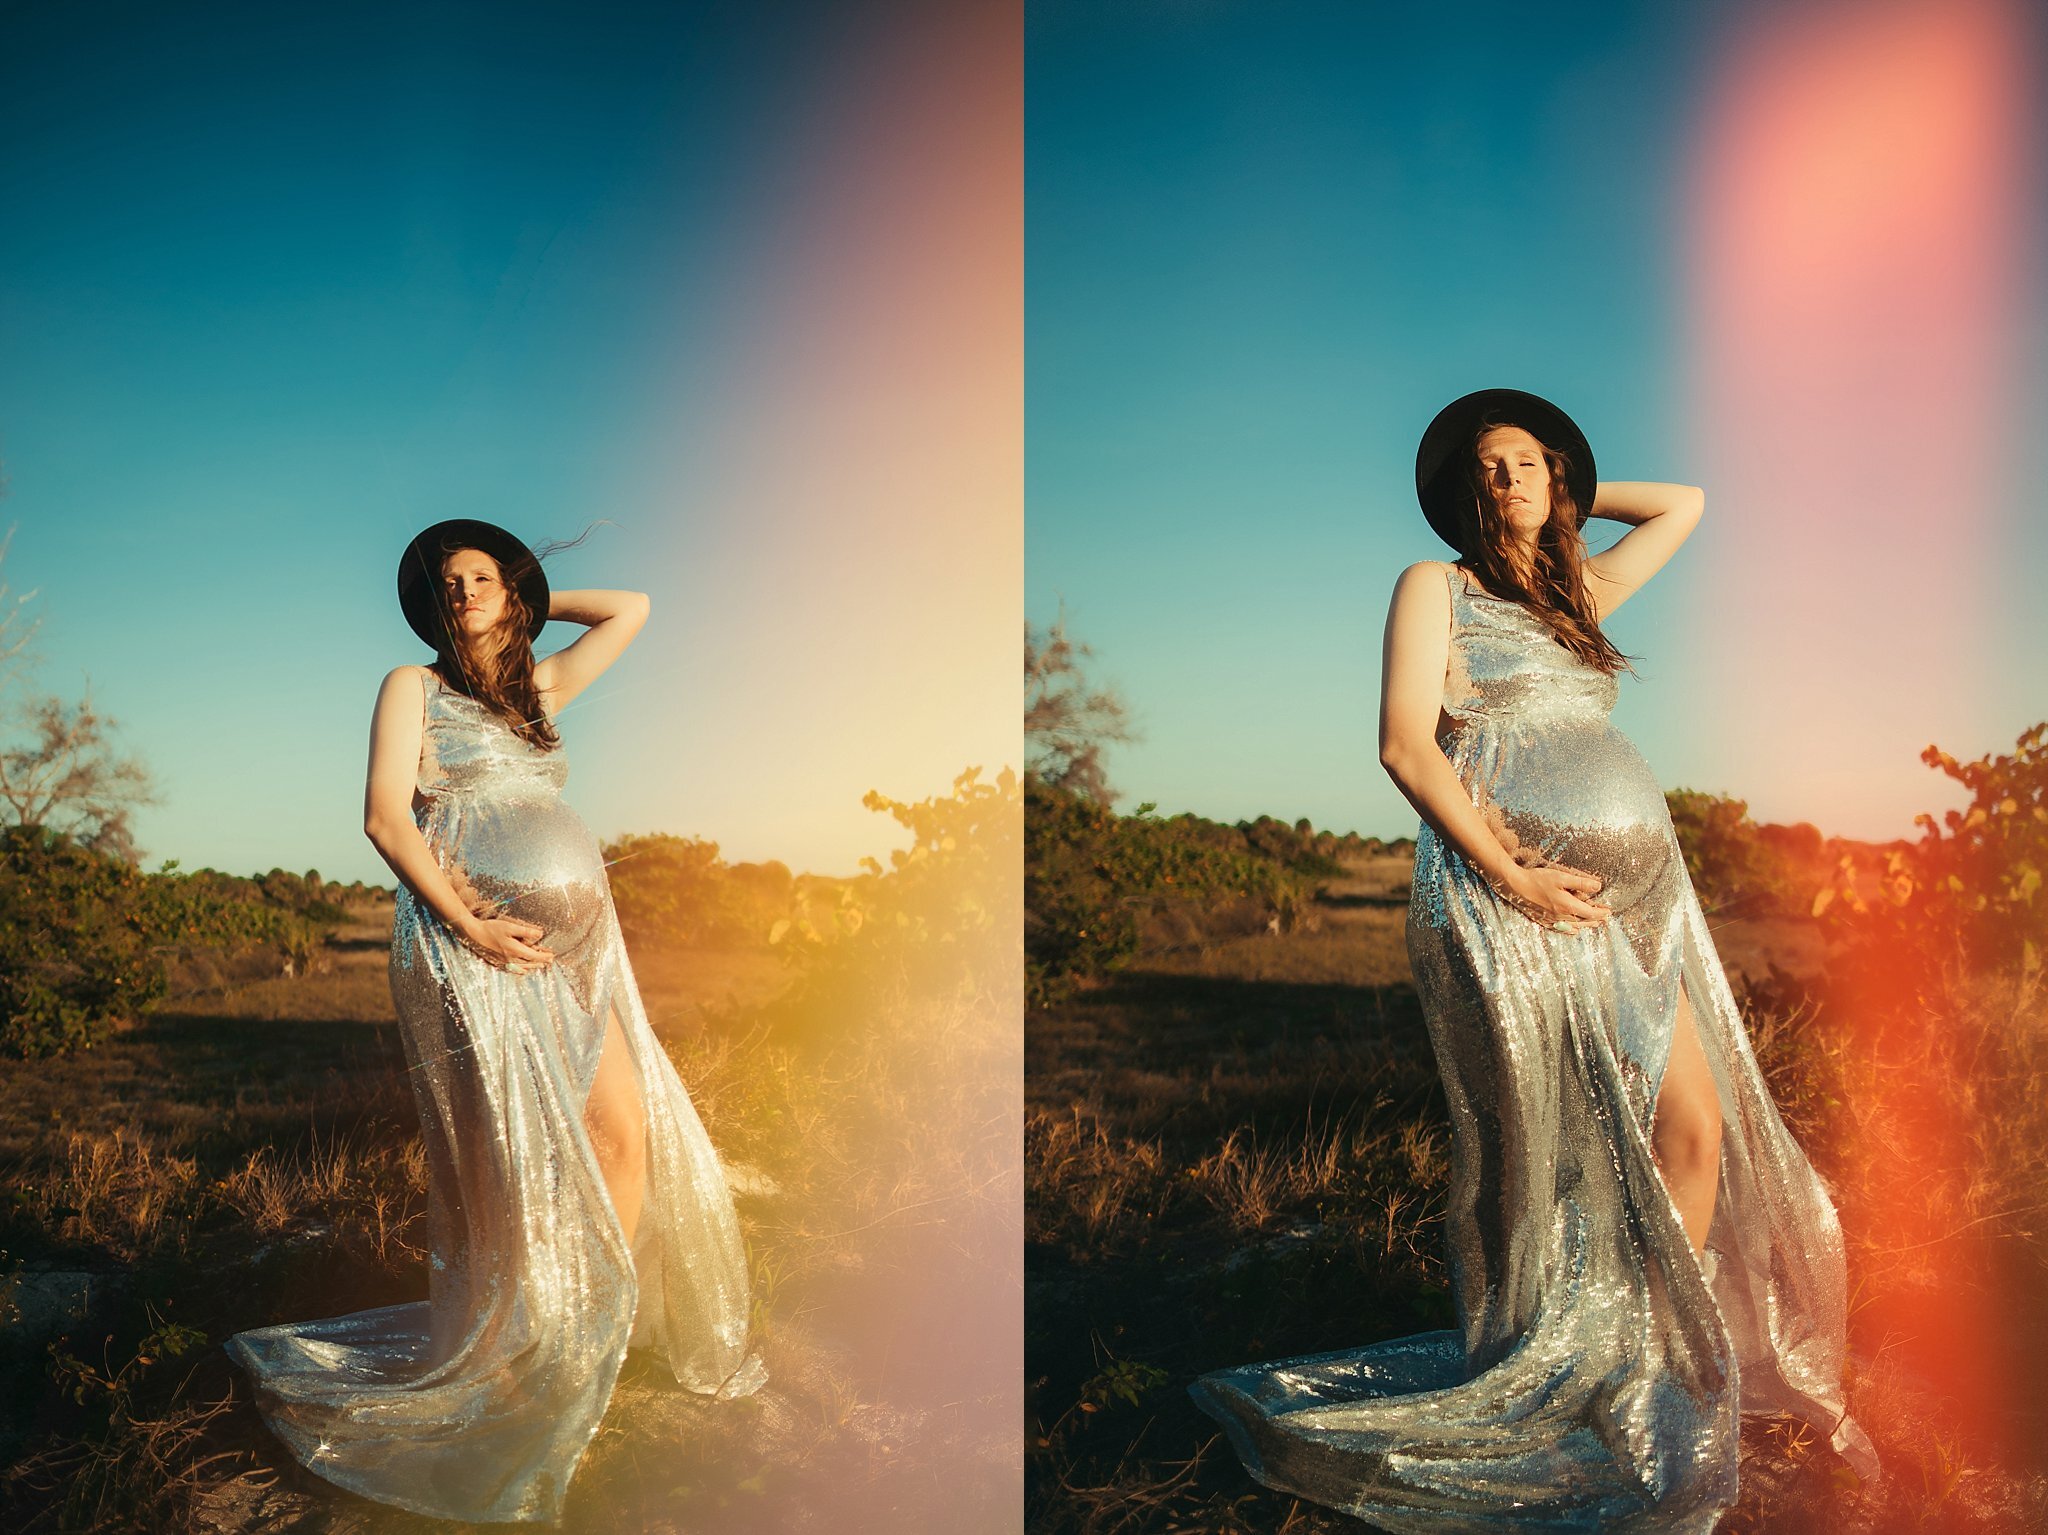 70s style pregnancy photos at the beach, st Pete fl